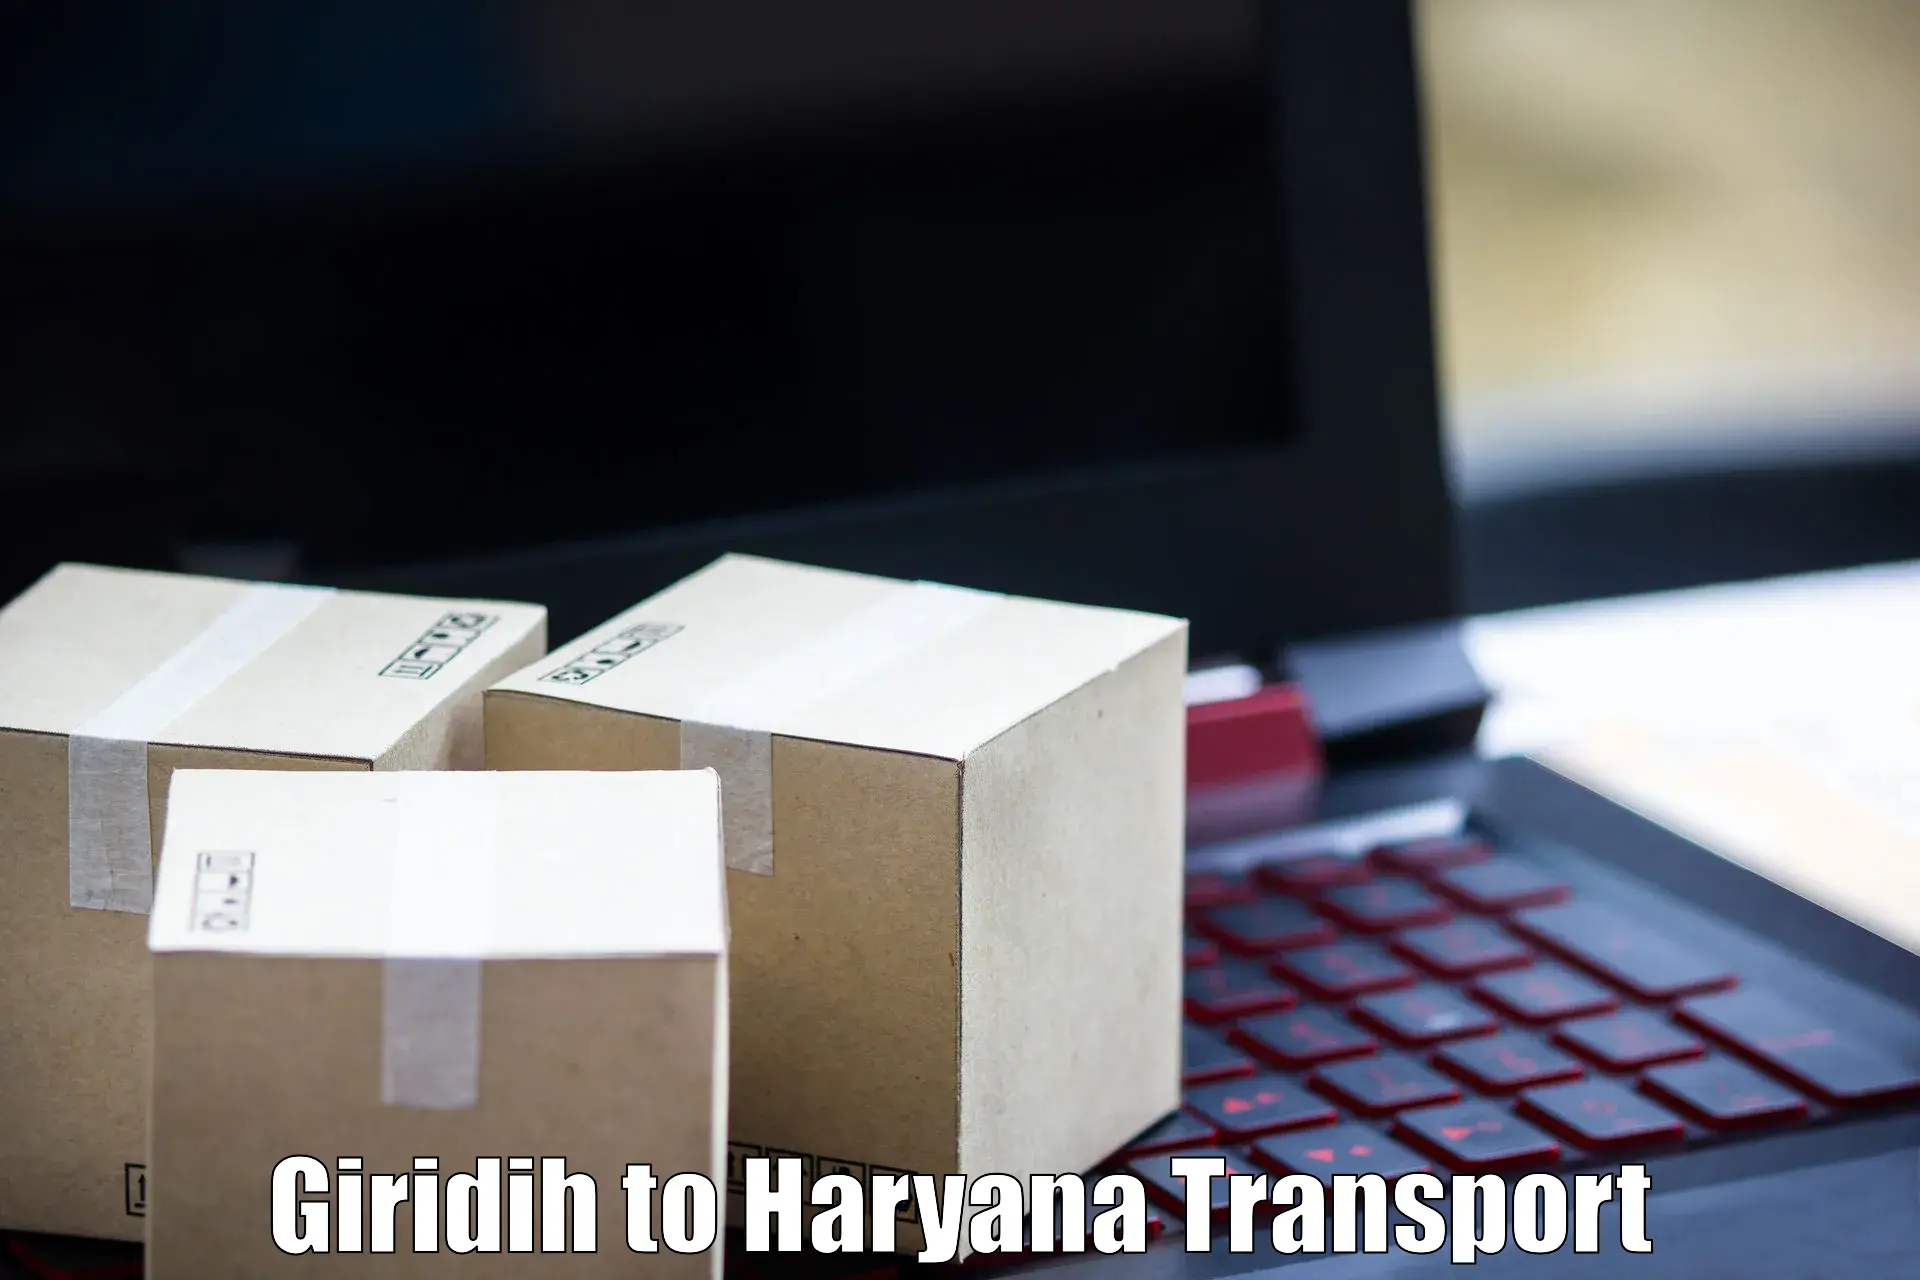 Daily parcel service transport in Giridih to Sirsa